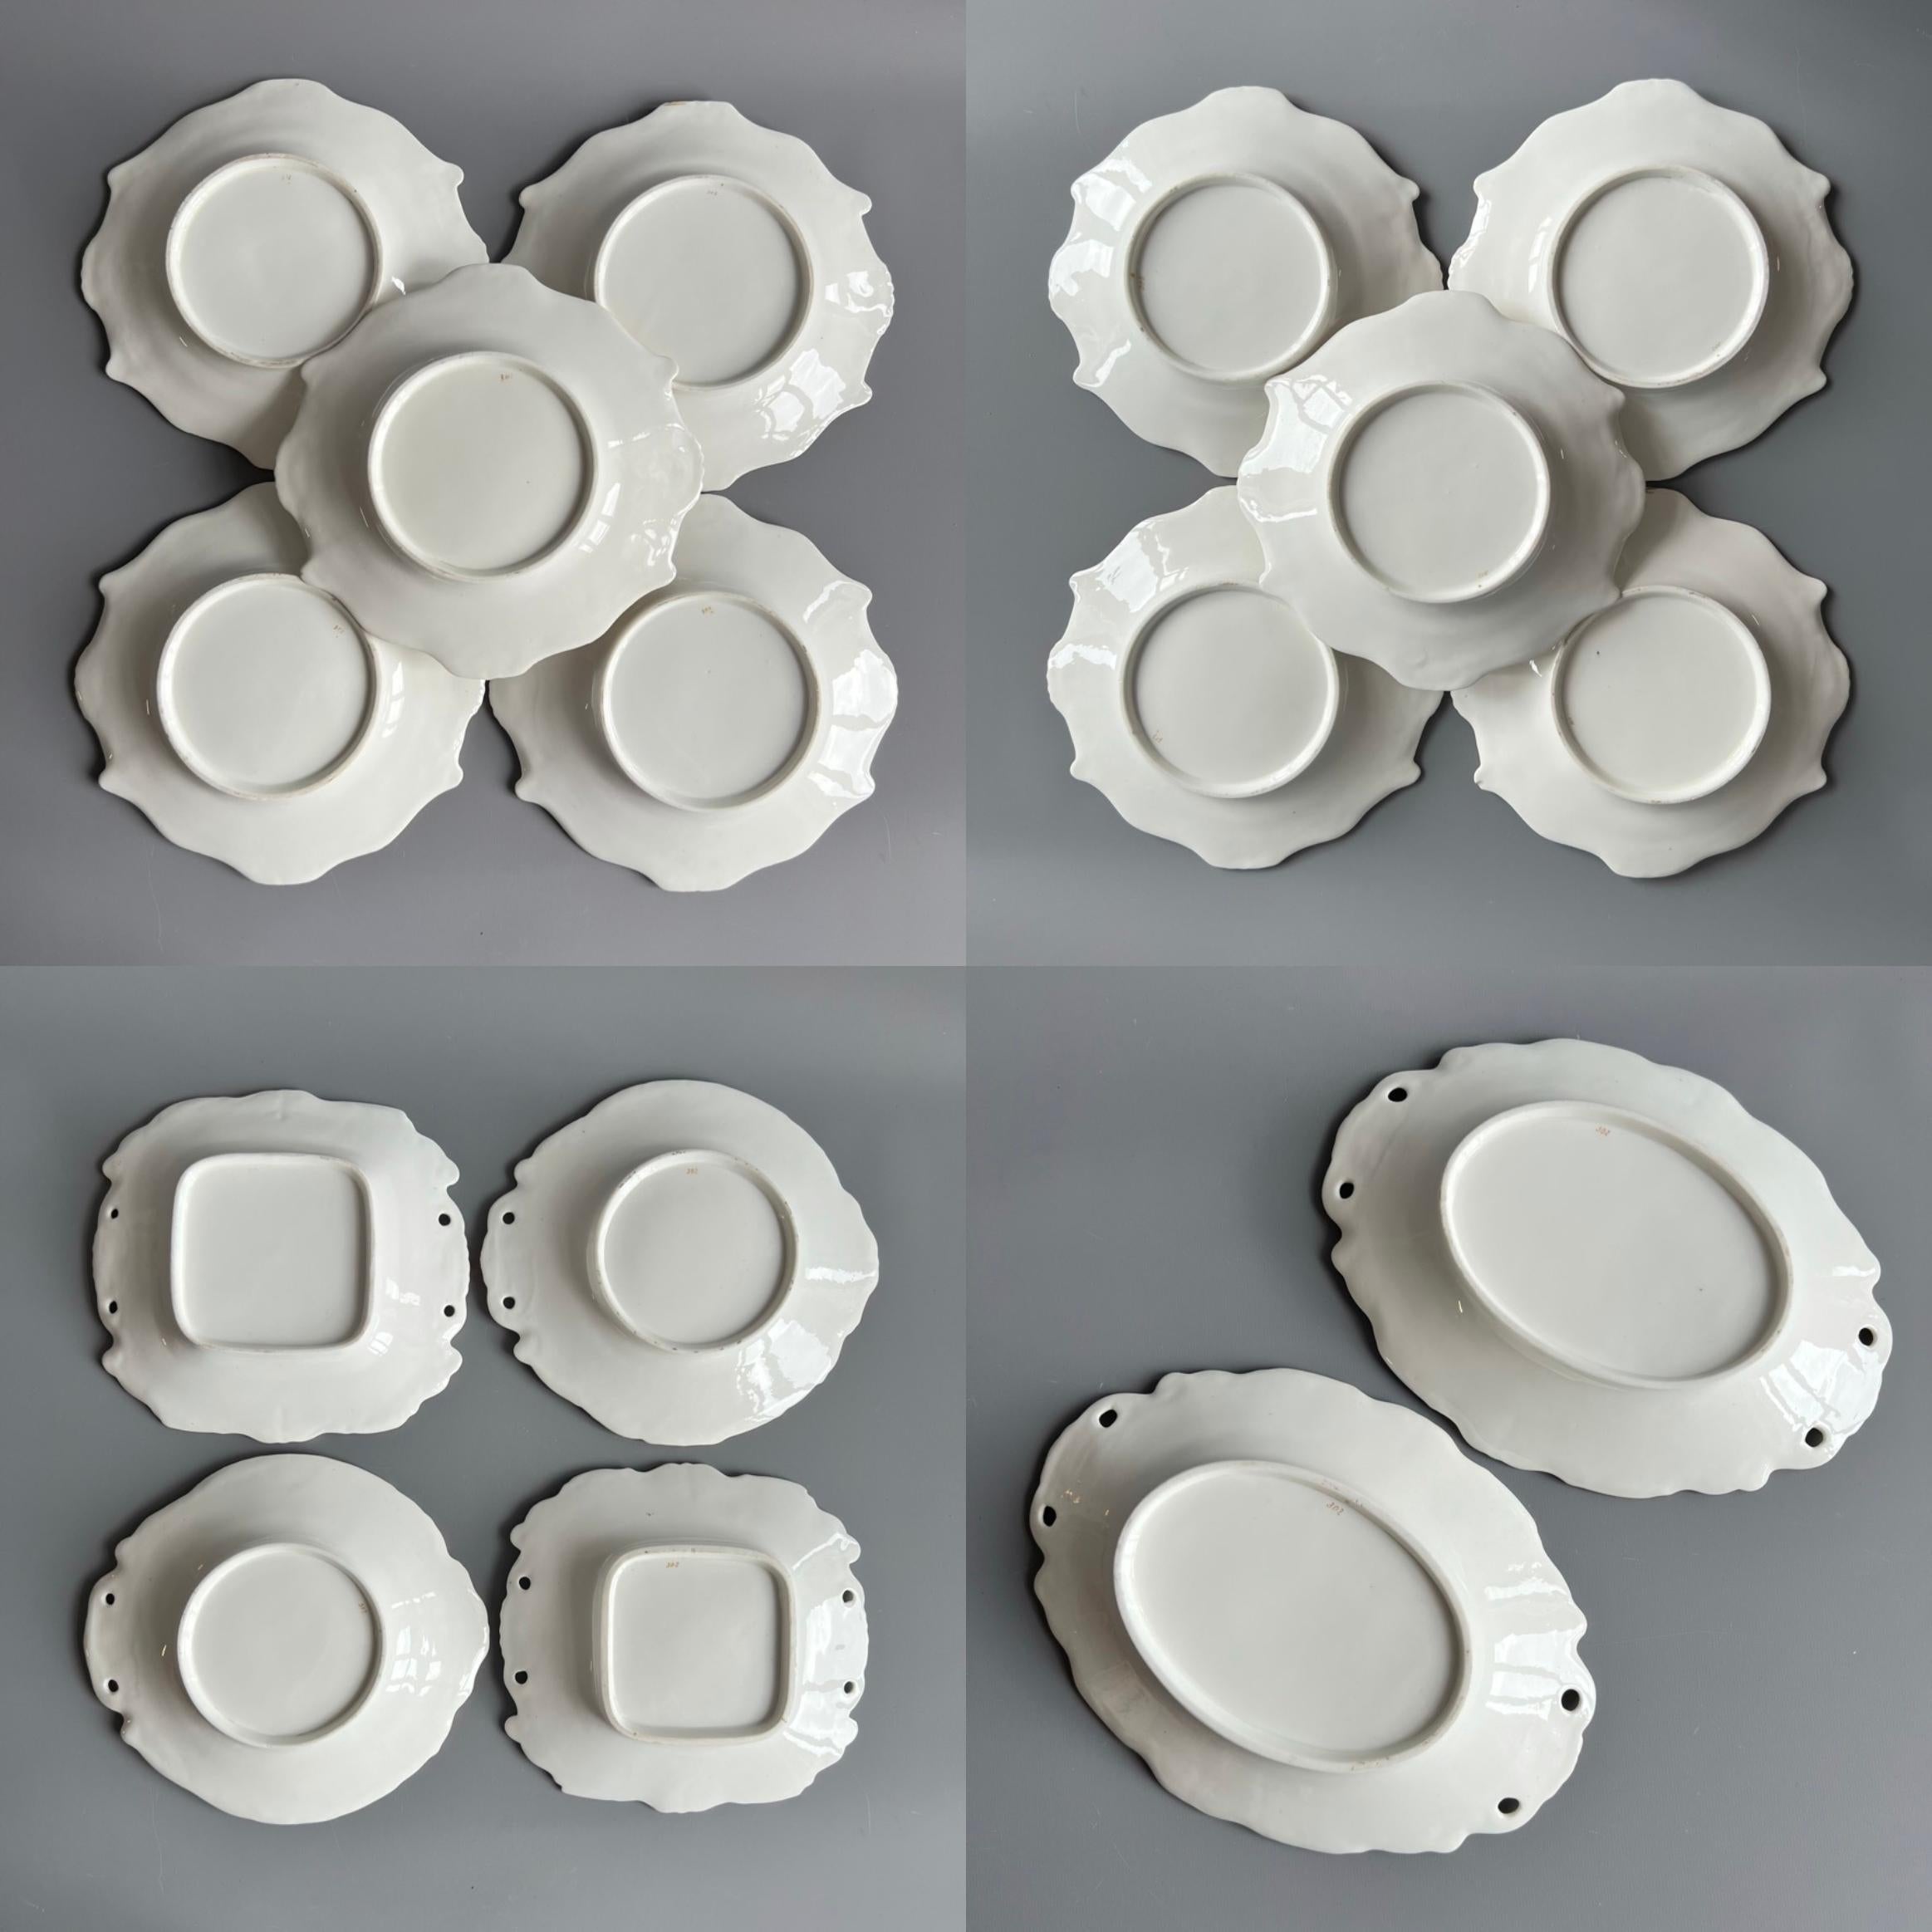 Minton Dessert Service, Inverted Shell White with Monochrome Flowers, ca 1830 For Sale 10